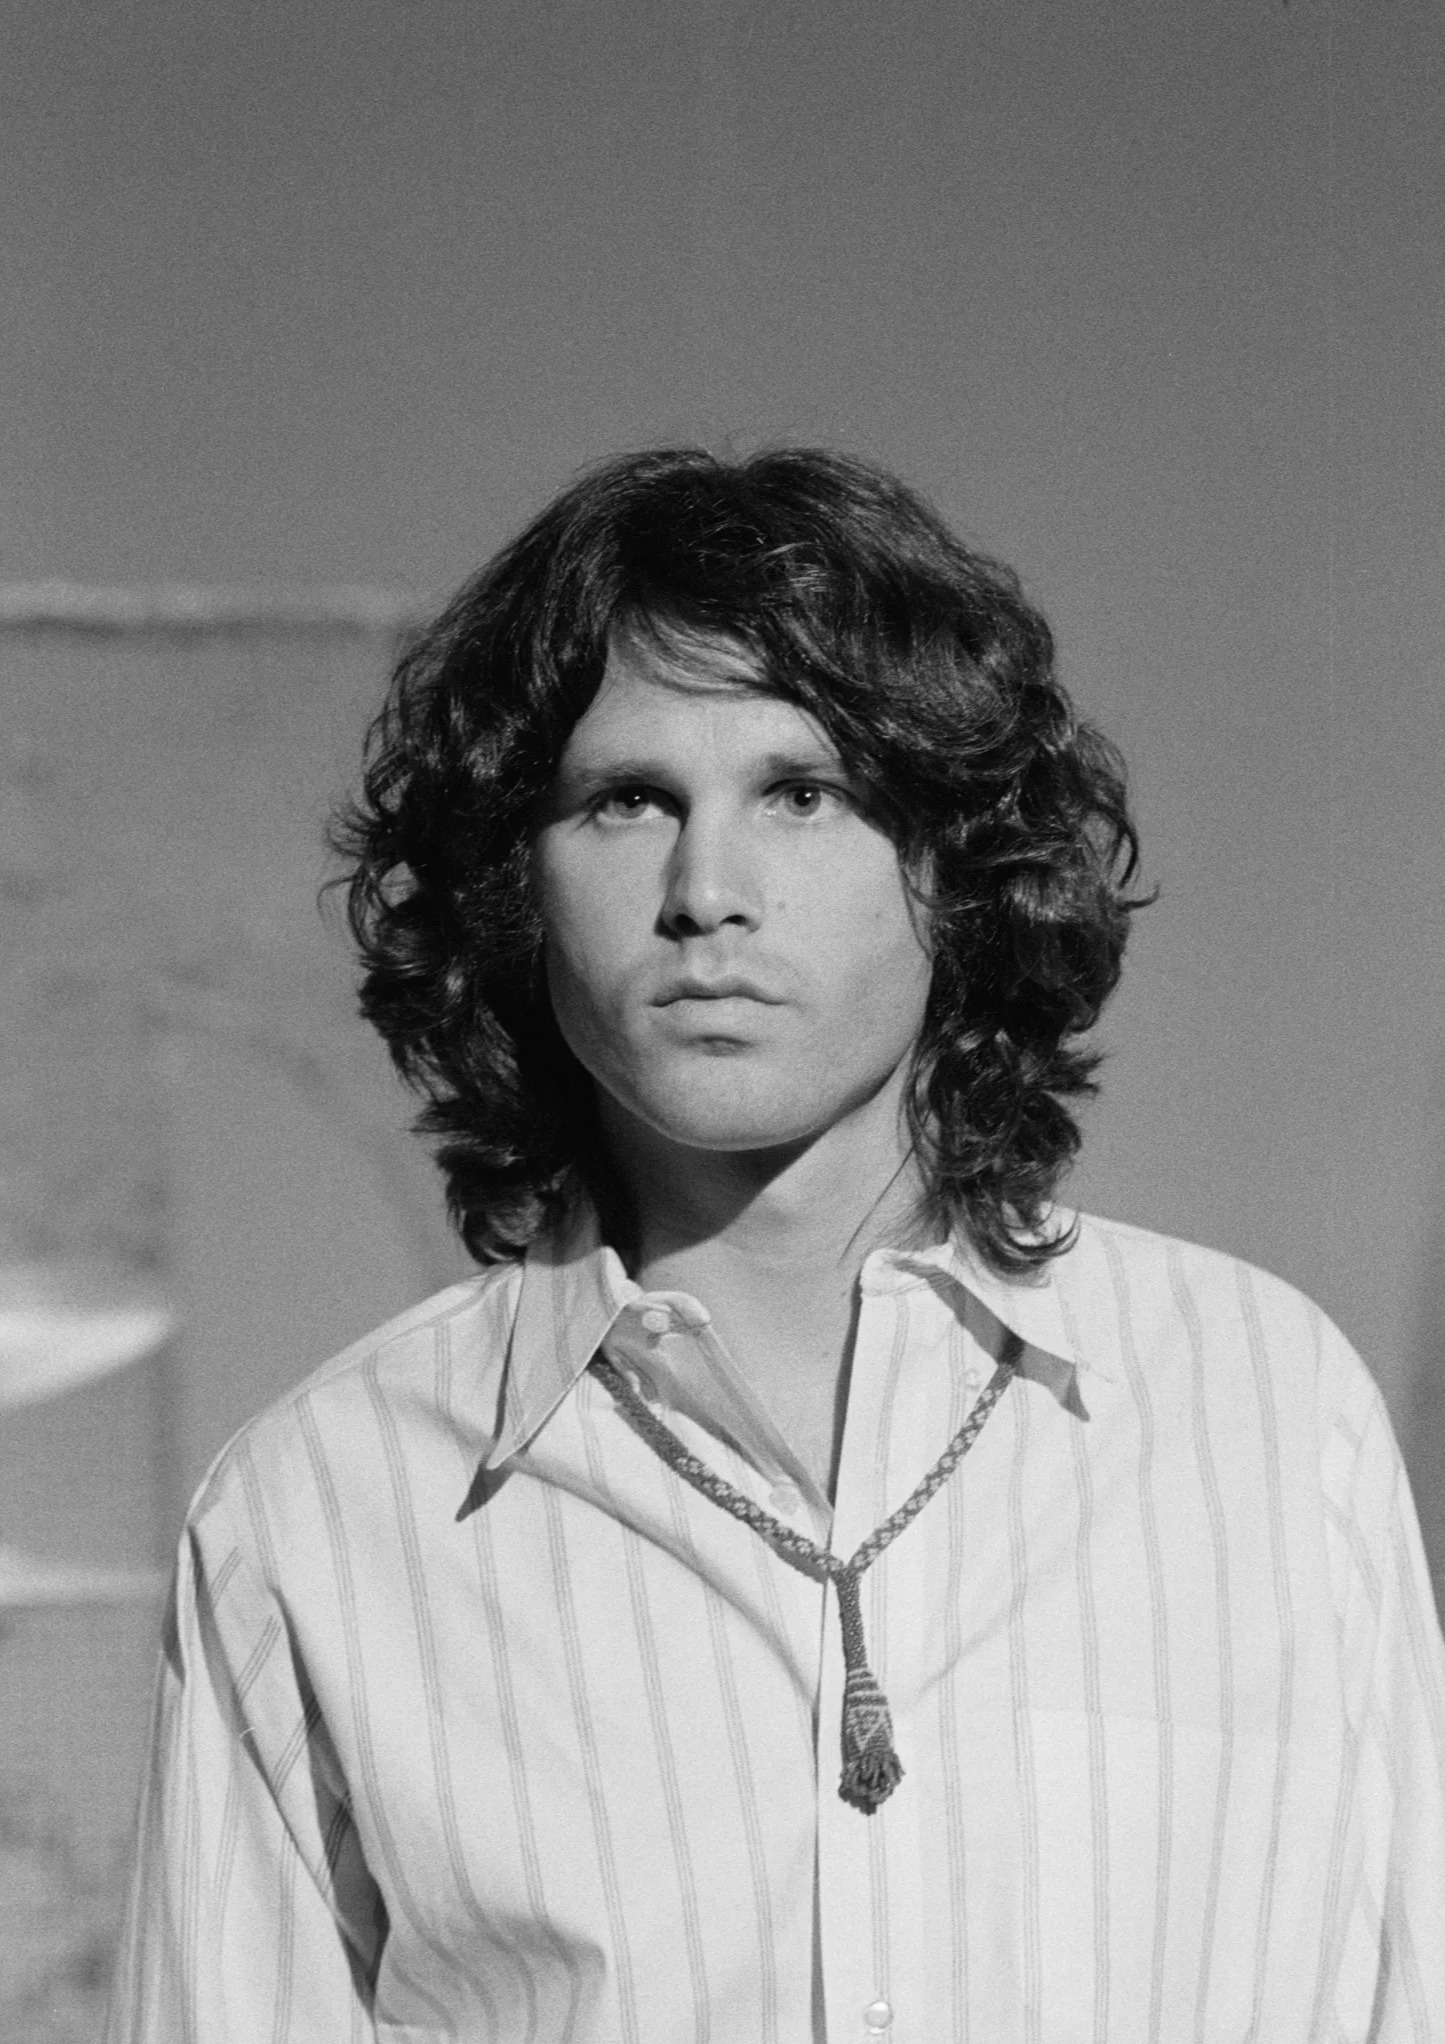 Singer Jim Morrison, leader of the rock band The Doors, died of a heart attack